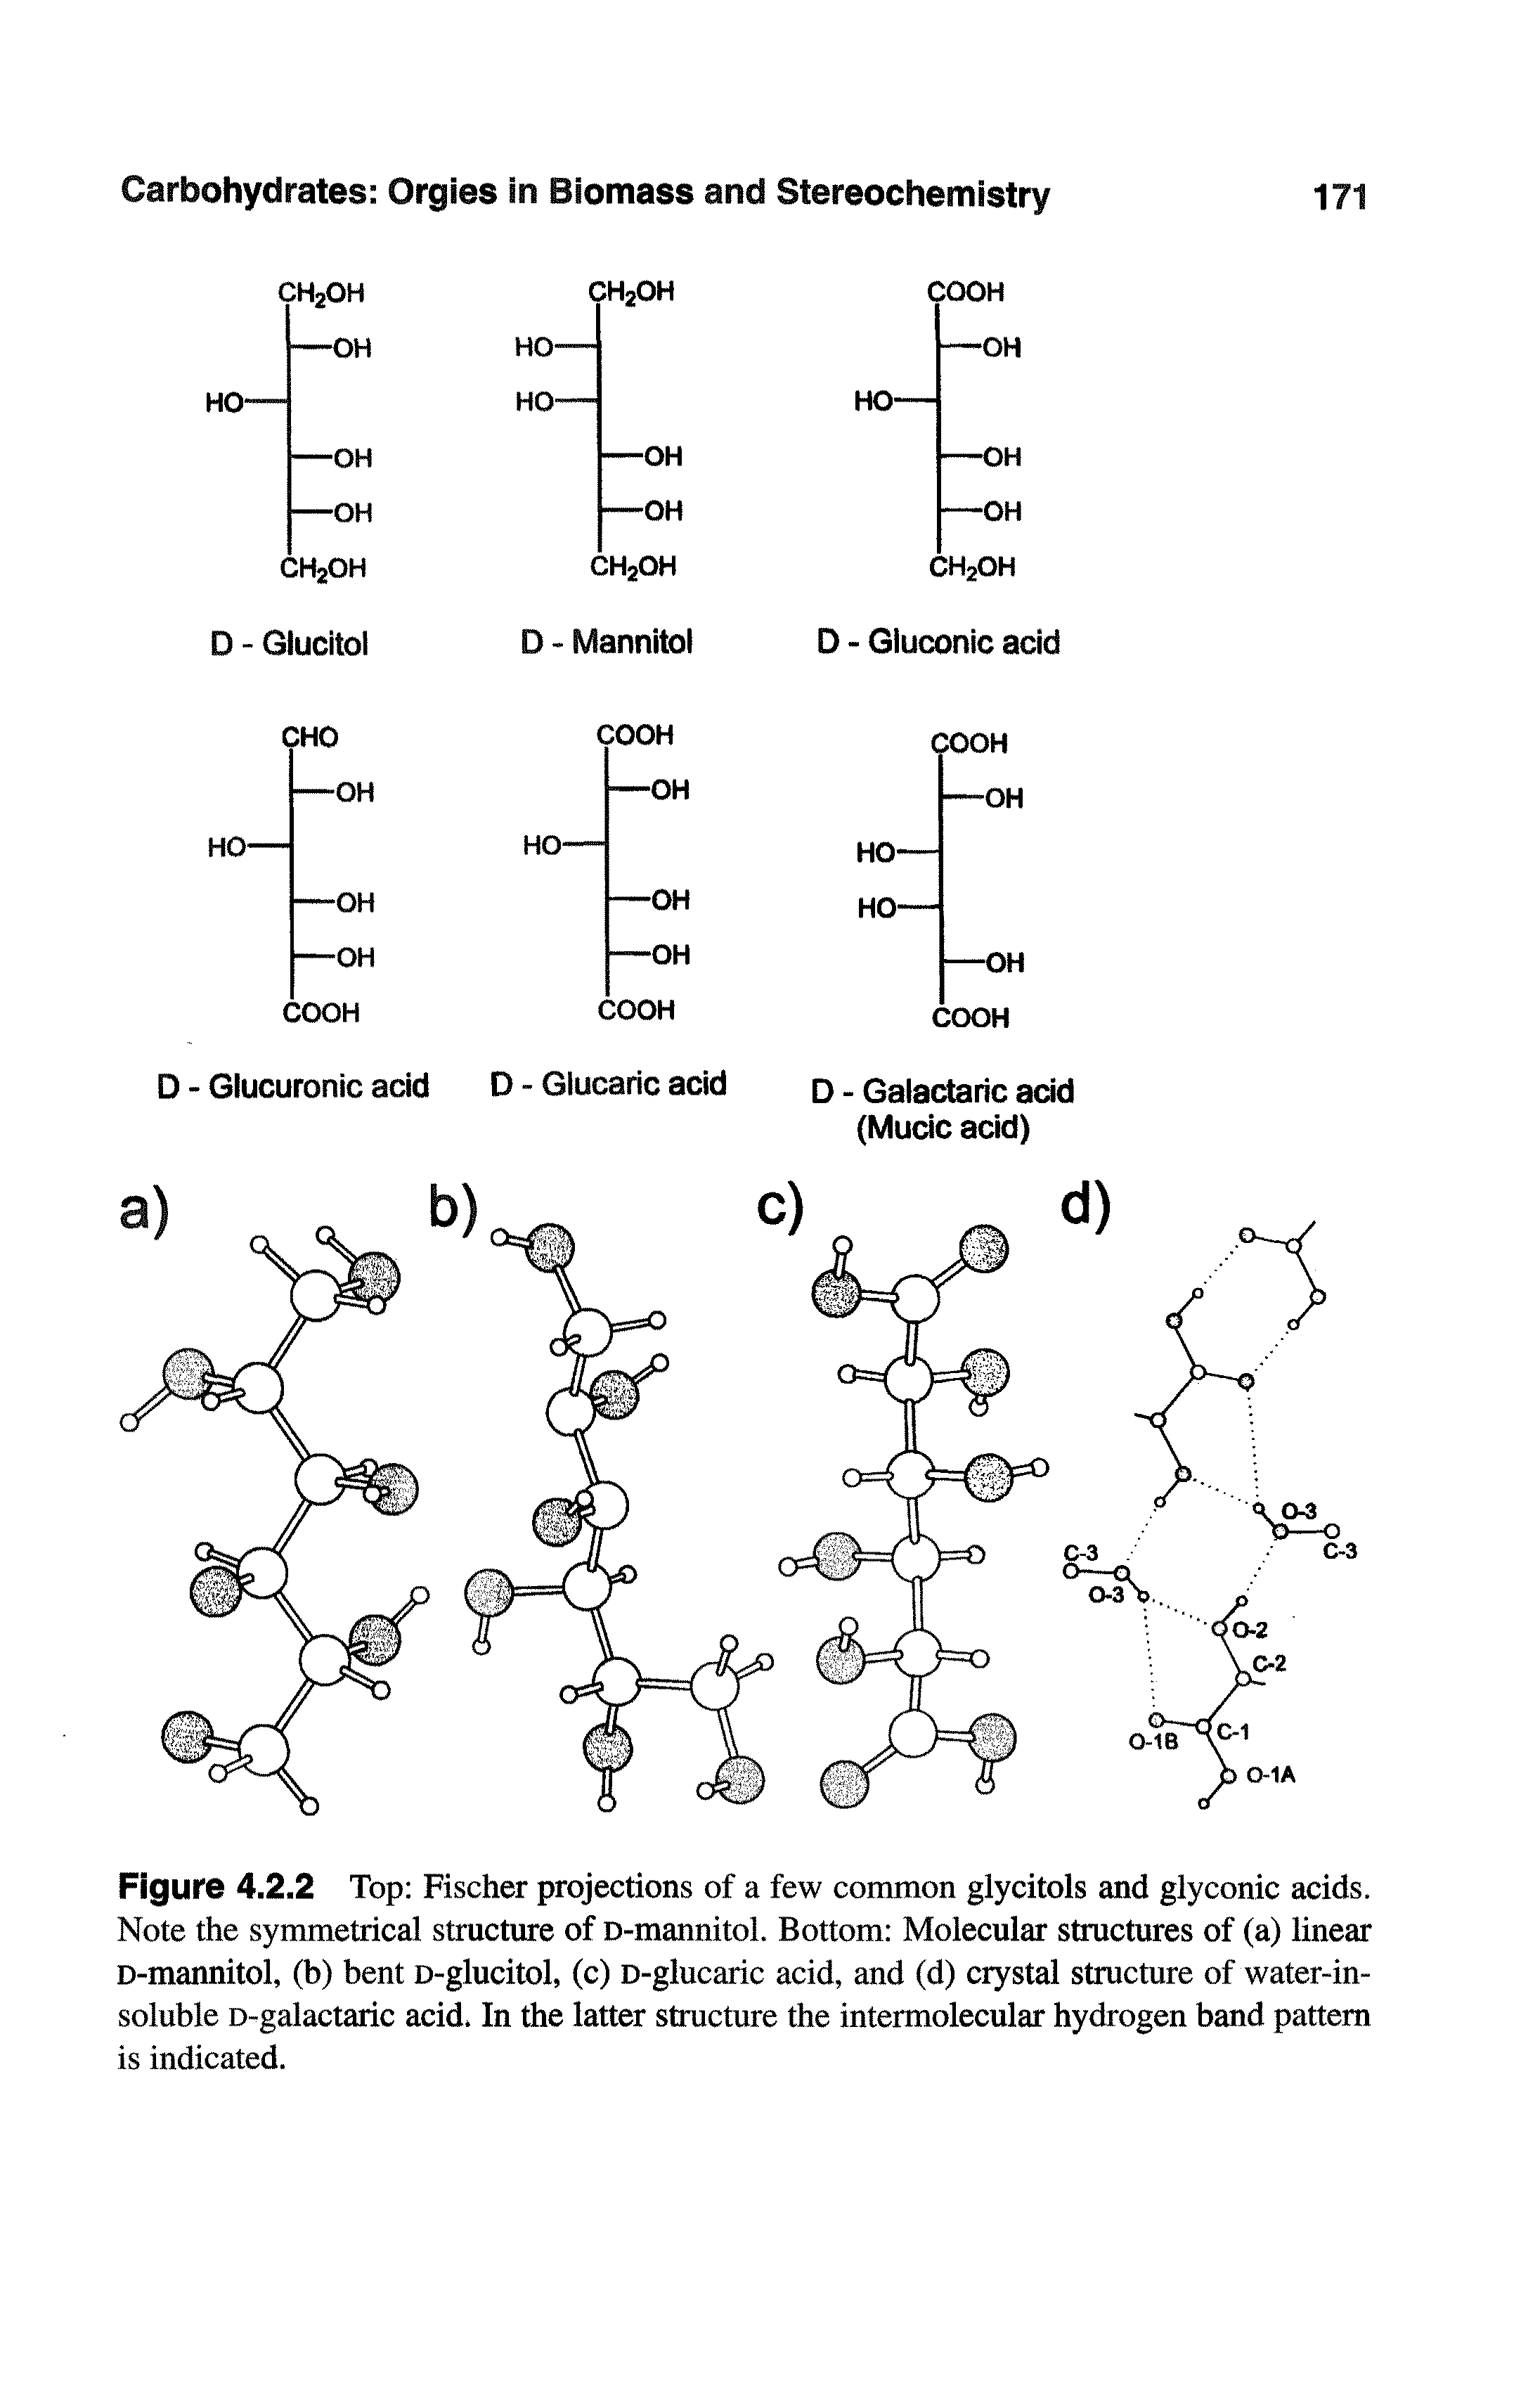 Figure 4.2.2 Top Fischer projections of a few common glycitols and glyconic acids. Note the symmetrical structure of D-mannitol. Bottom Molecular structures of (a) linear D-mannitol, (b) bent D-glucitol, (c) D-glucaric acid, and (d) crystal structure of water-in-soluble D-galactaric acid. In the latter structure the intermolecular hydrogen band pattern is indicated.